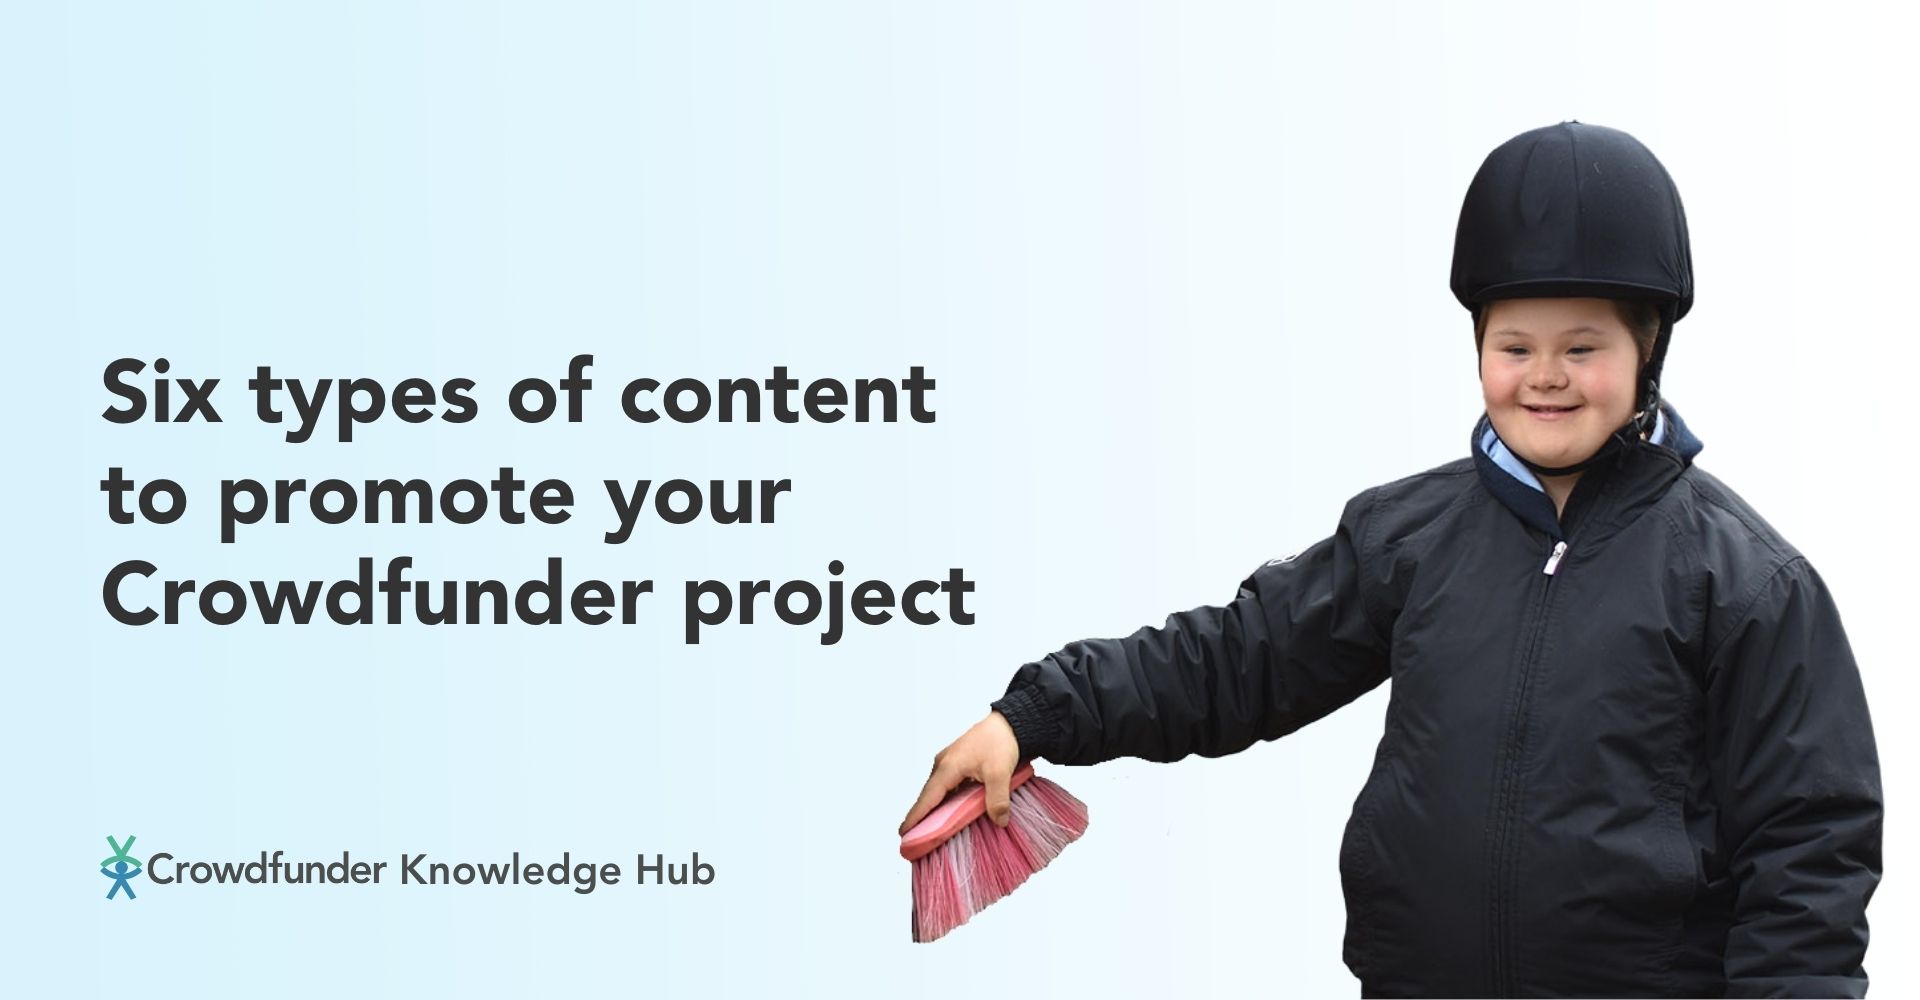 Six types of content to promote your Crowdfunder project